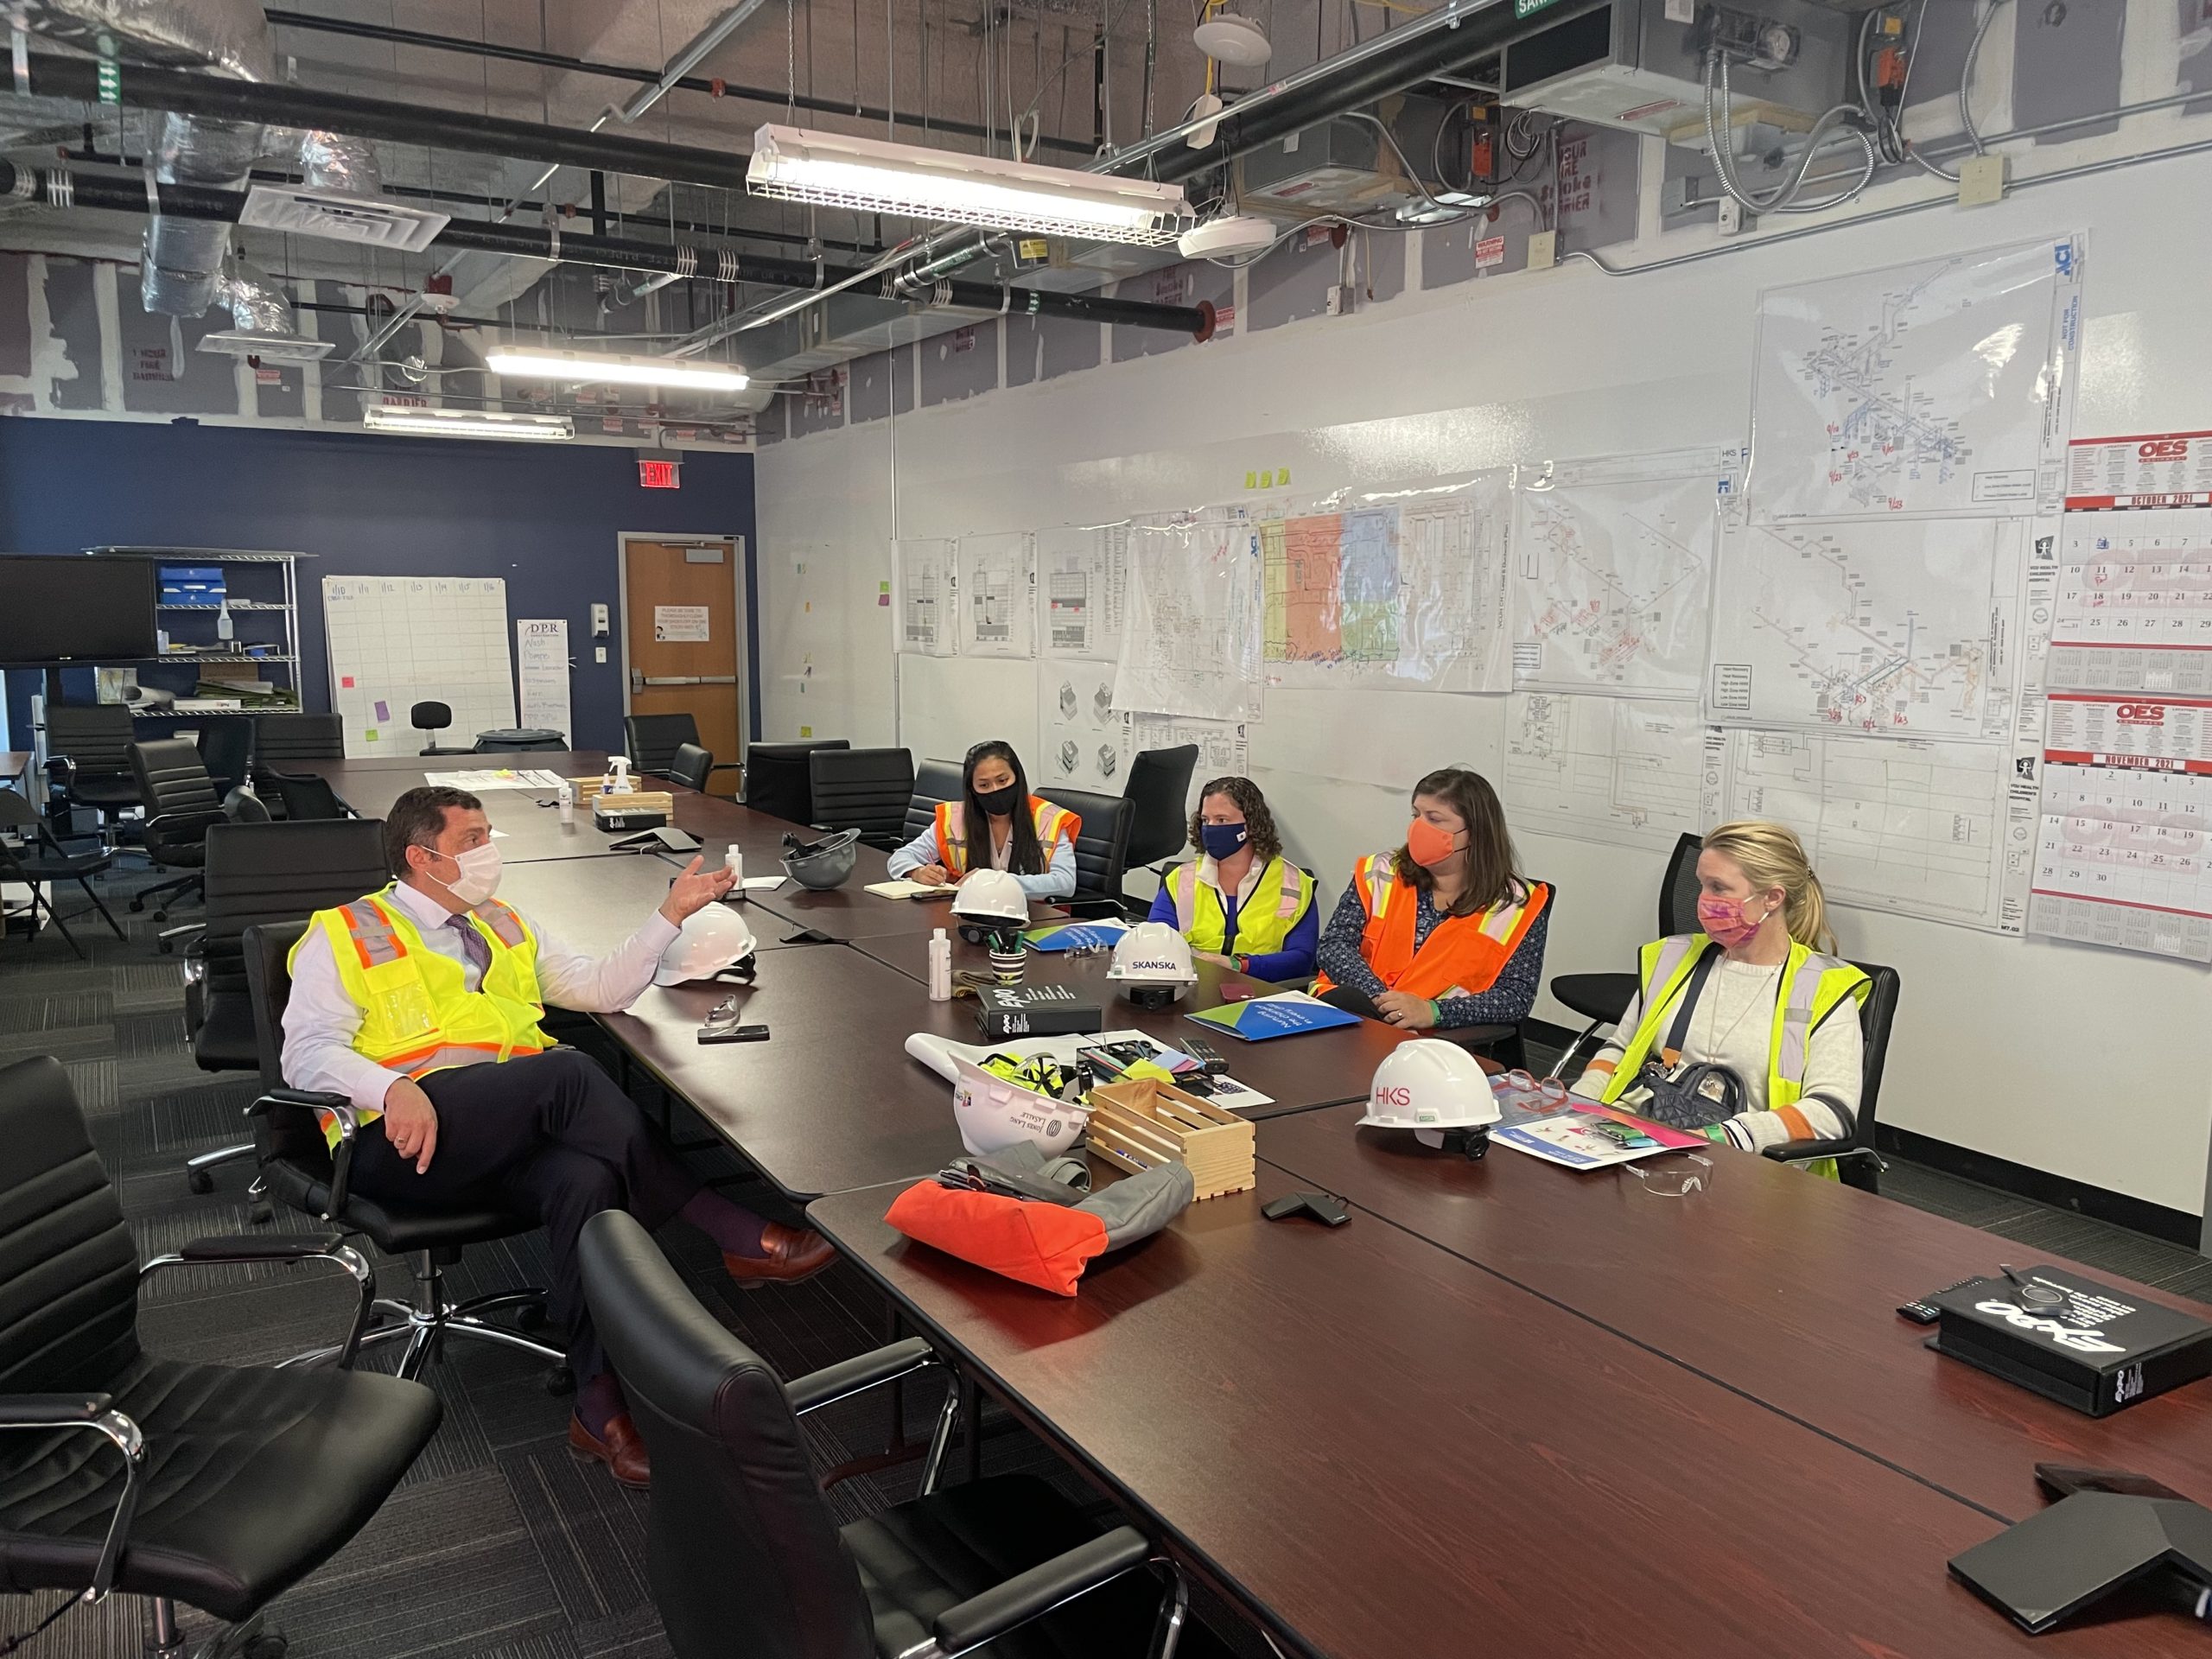 Group of people sitting at a desk at the construction site